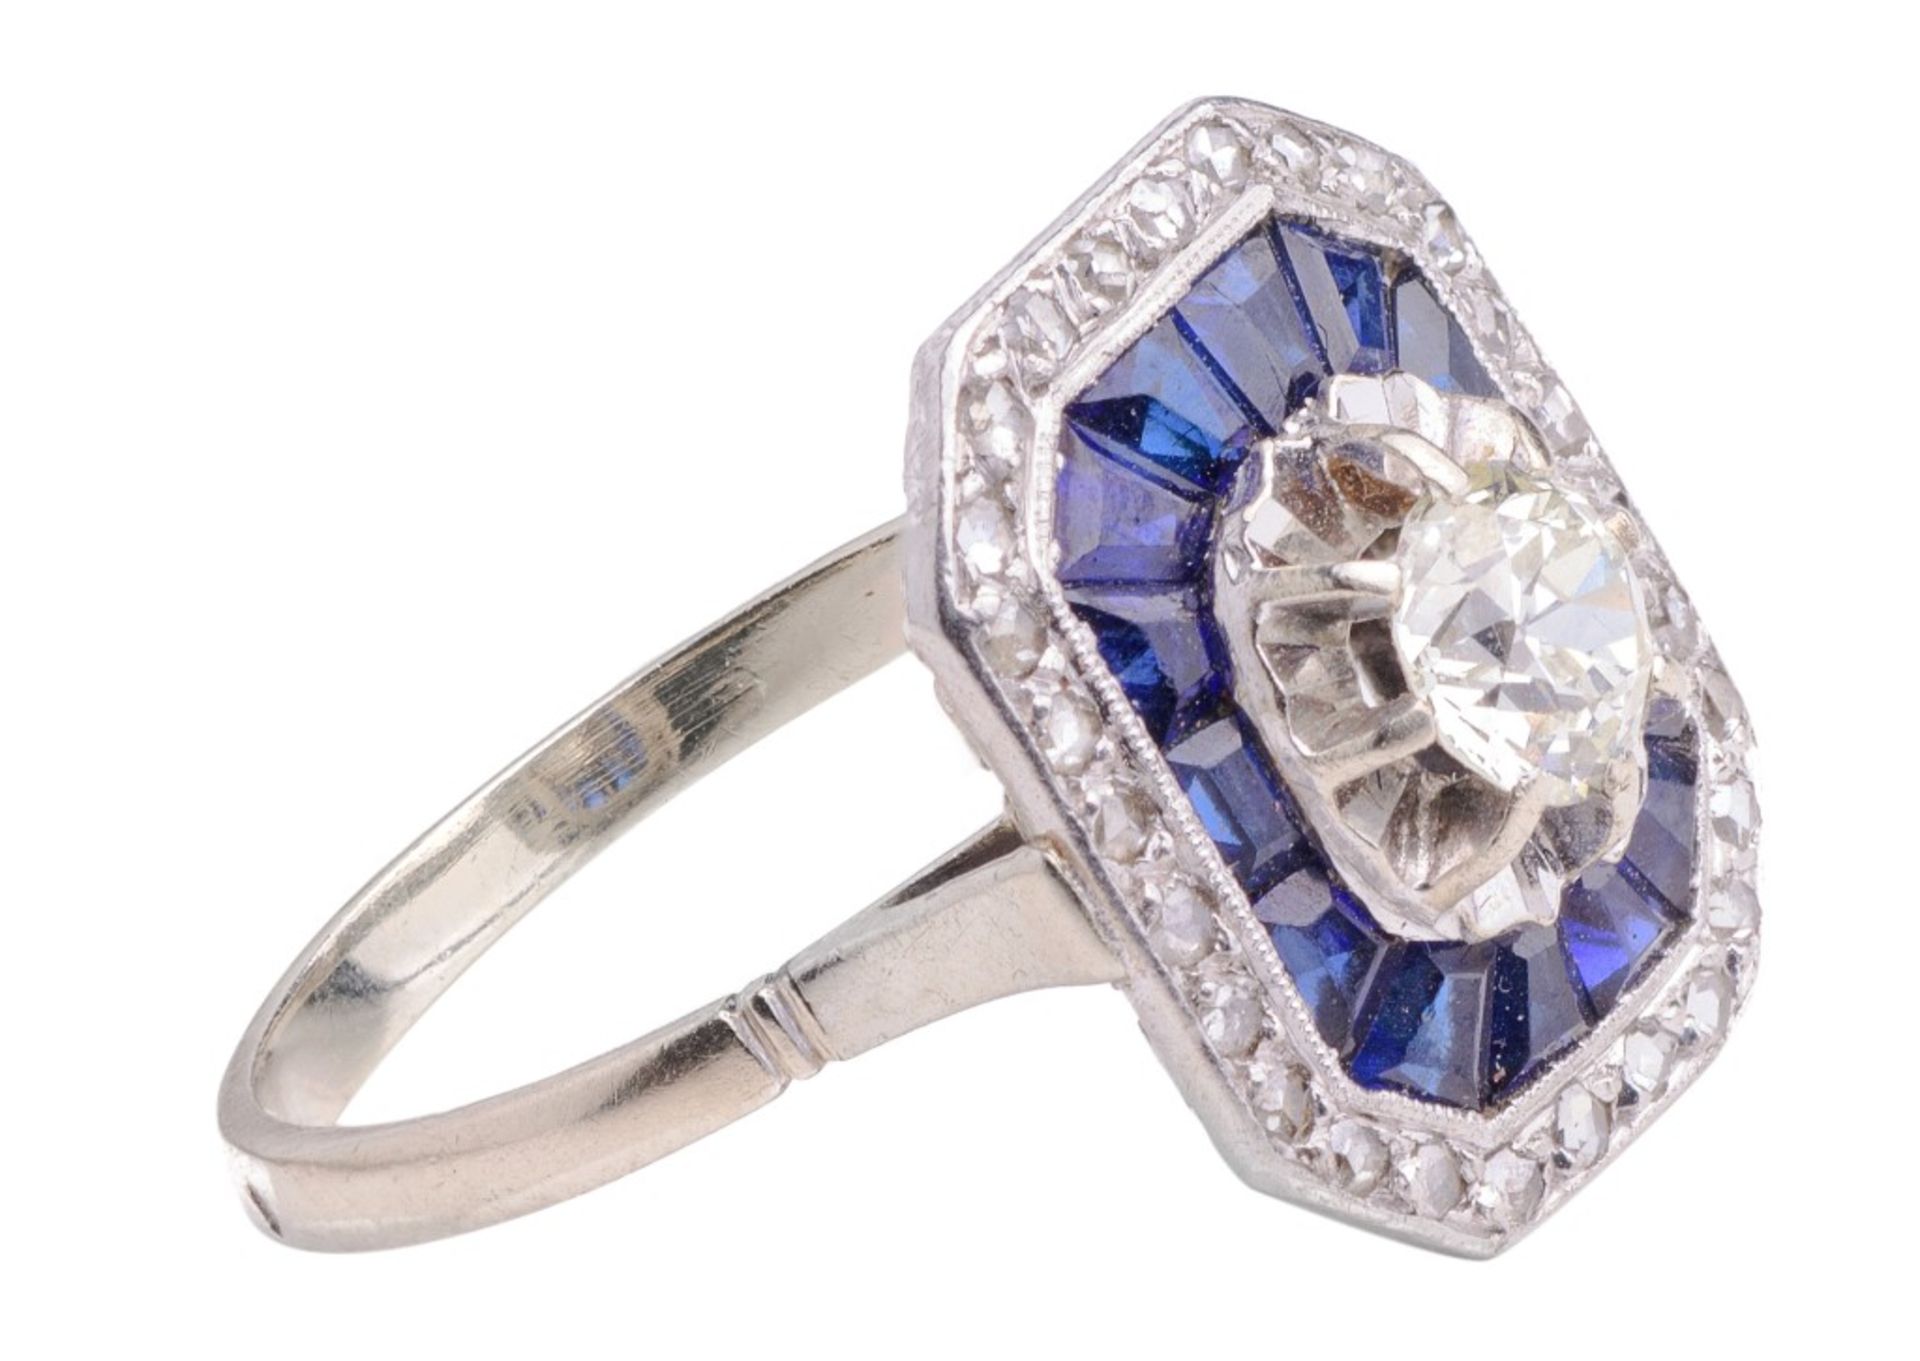 An art déco period ladies 18ct white gold ring set with diamonds and sapphires, weight 5,6 g.